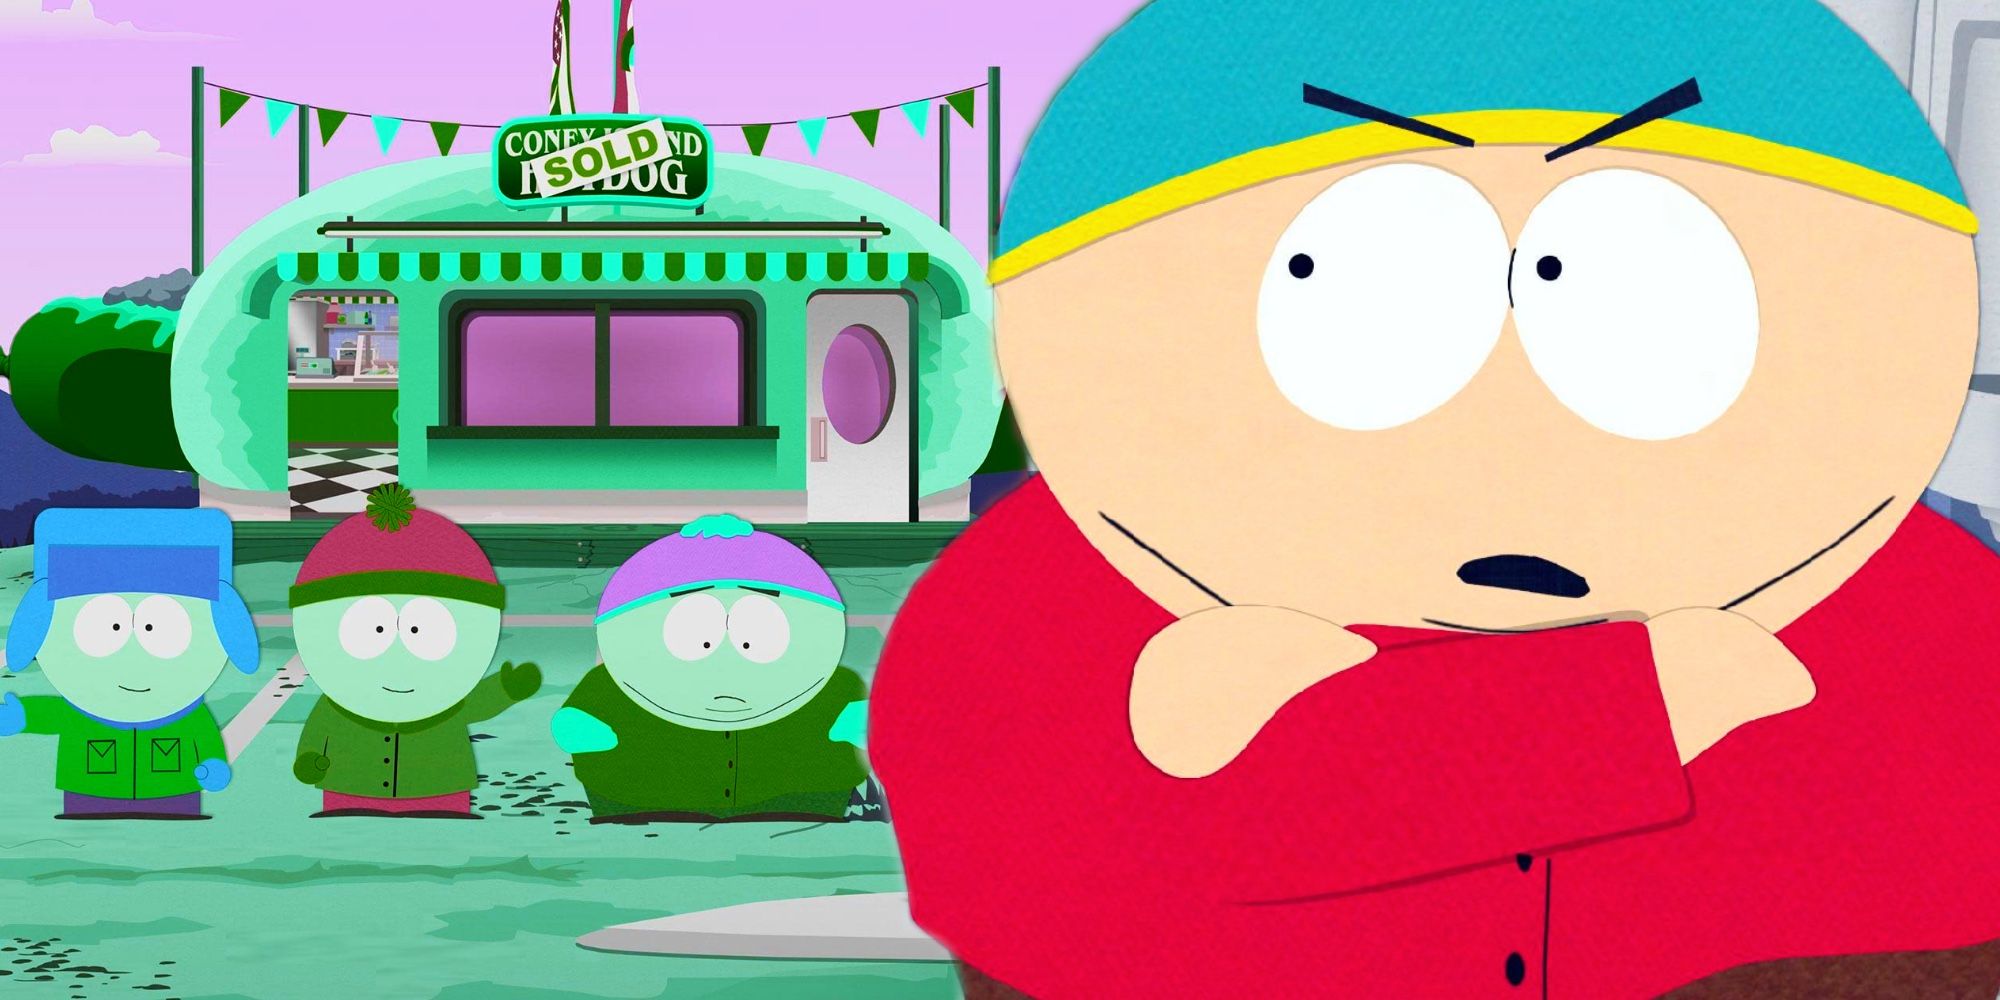 South Park Streaming Wars End By Taking Piss out of Crypto